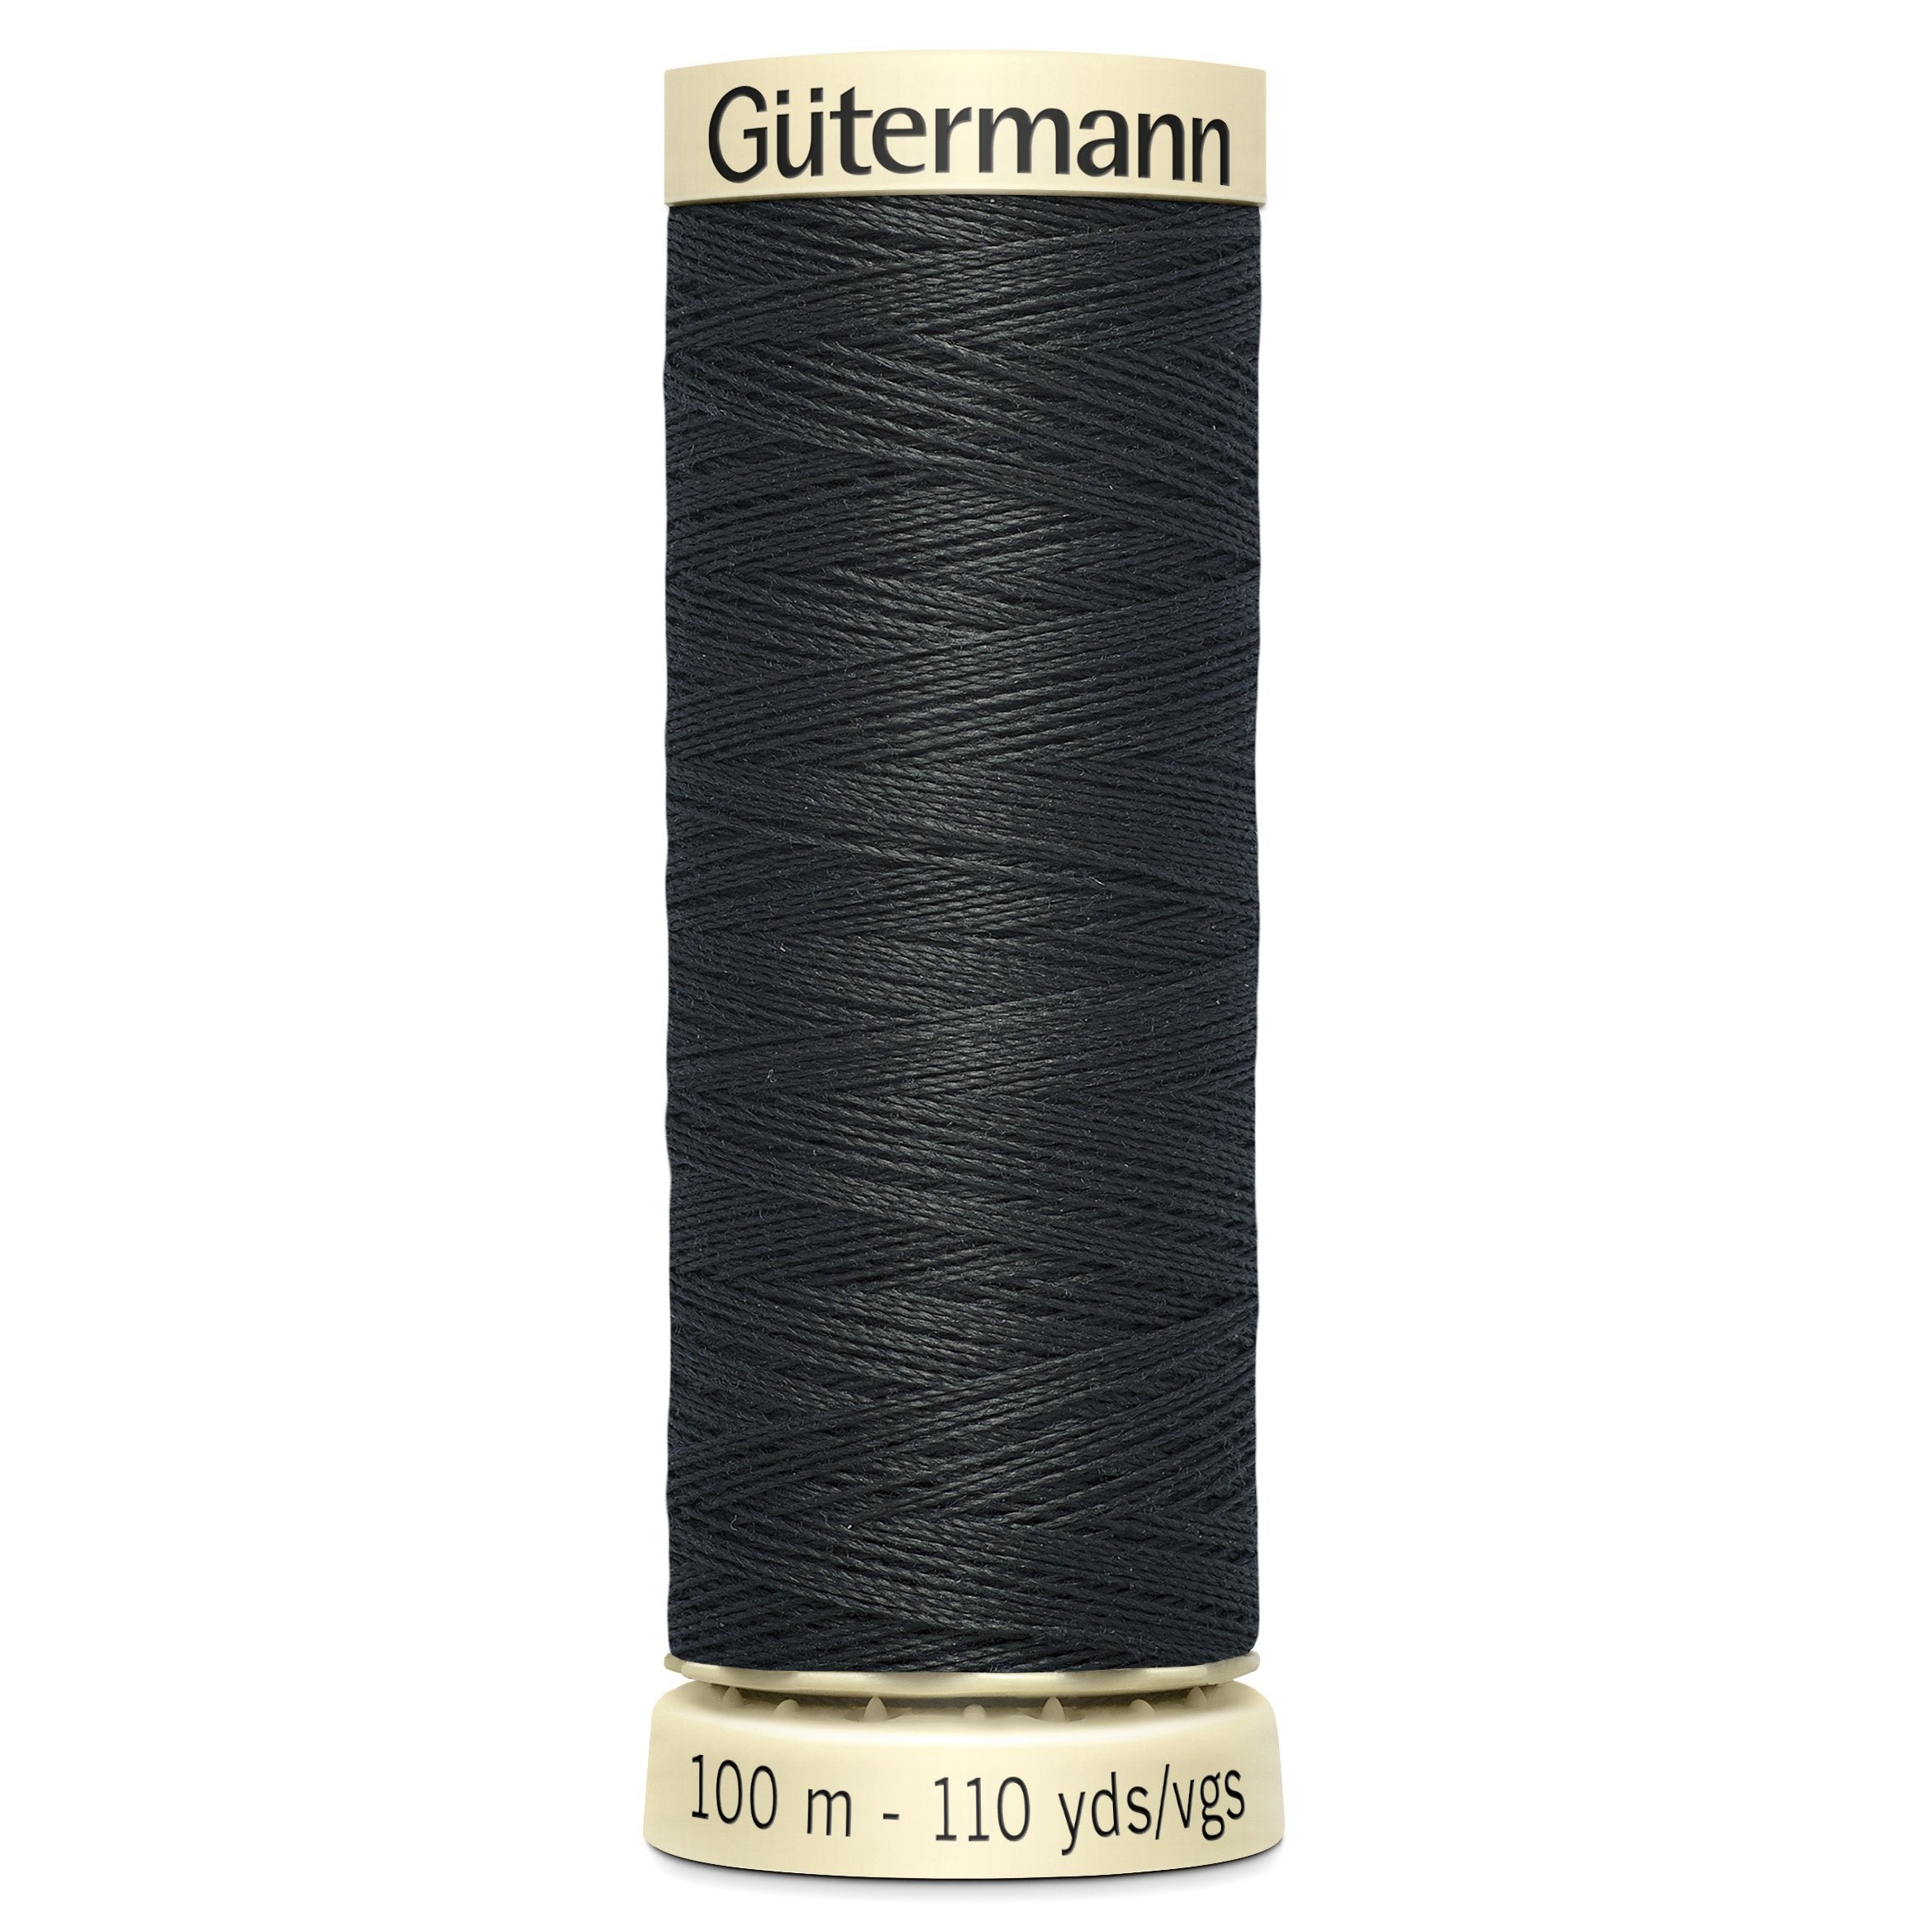 Gutermann Sew All Thread colour 542 Very Dark Grey from Jaycotts Sewing Supplies